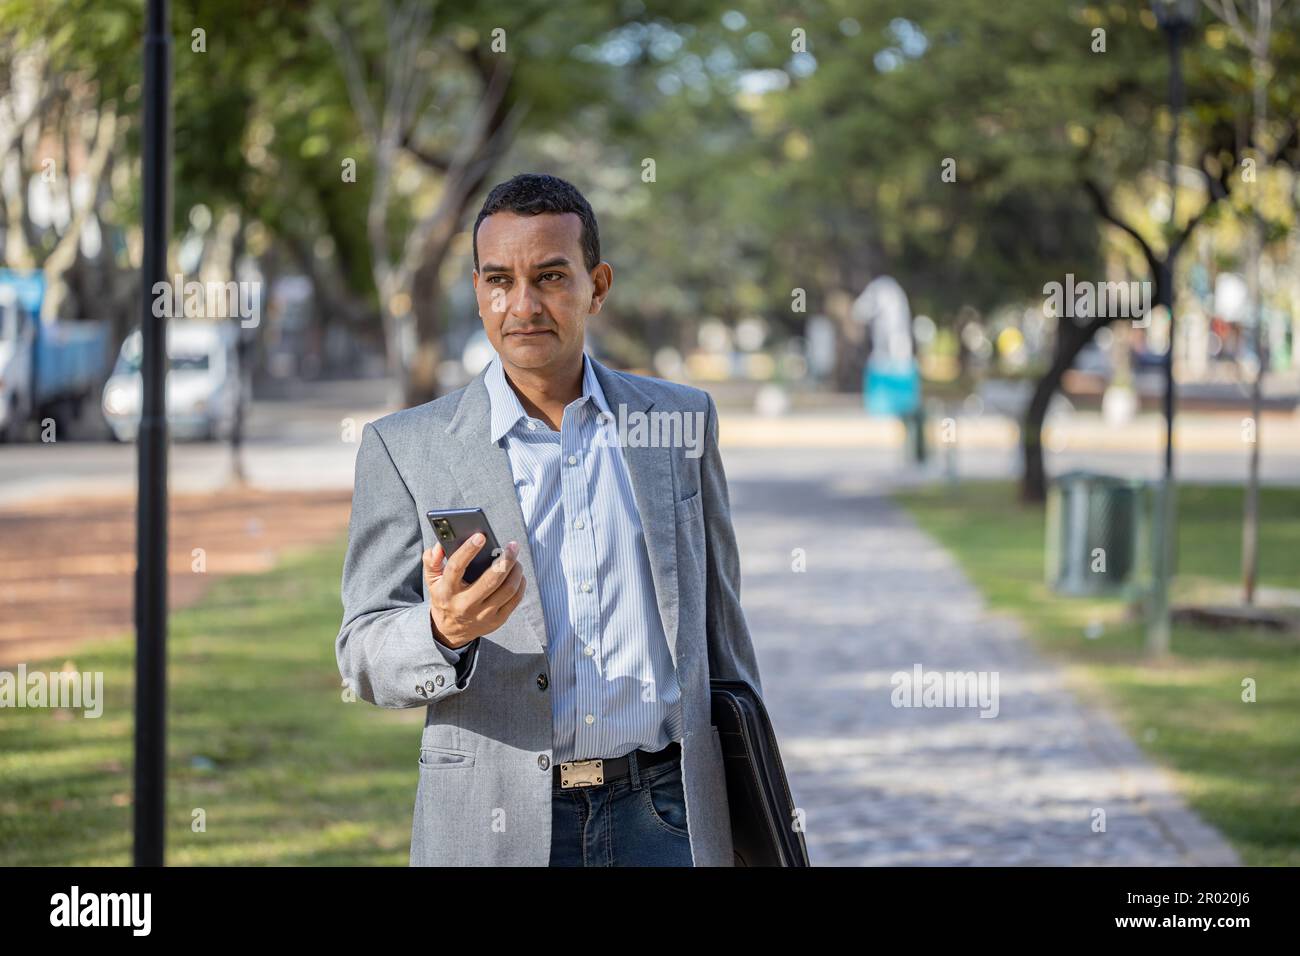 Young latin man in suit walking with mobile phone in hand. Stock Photo